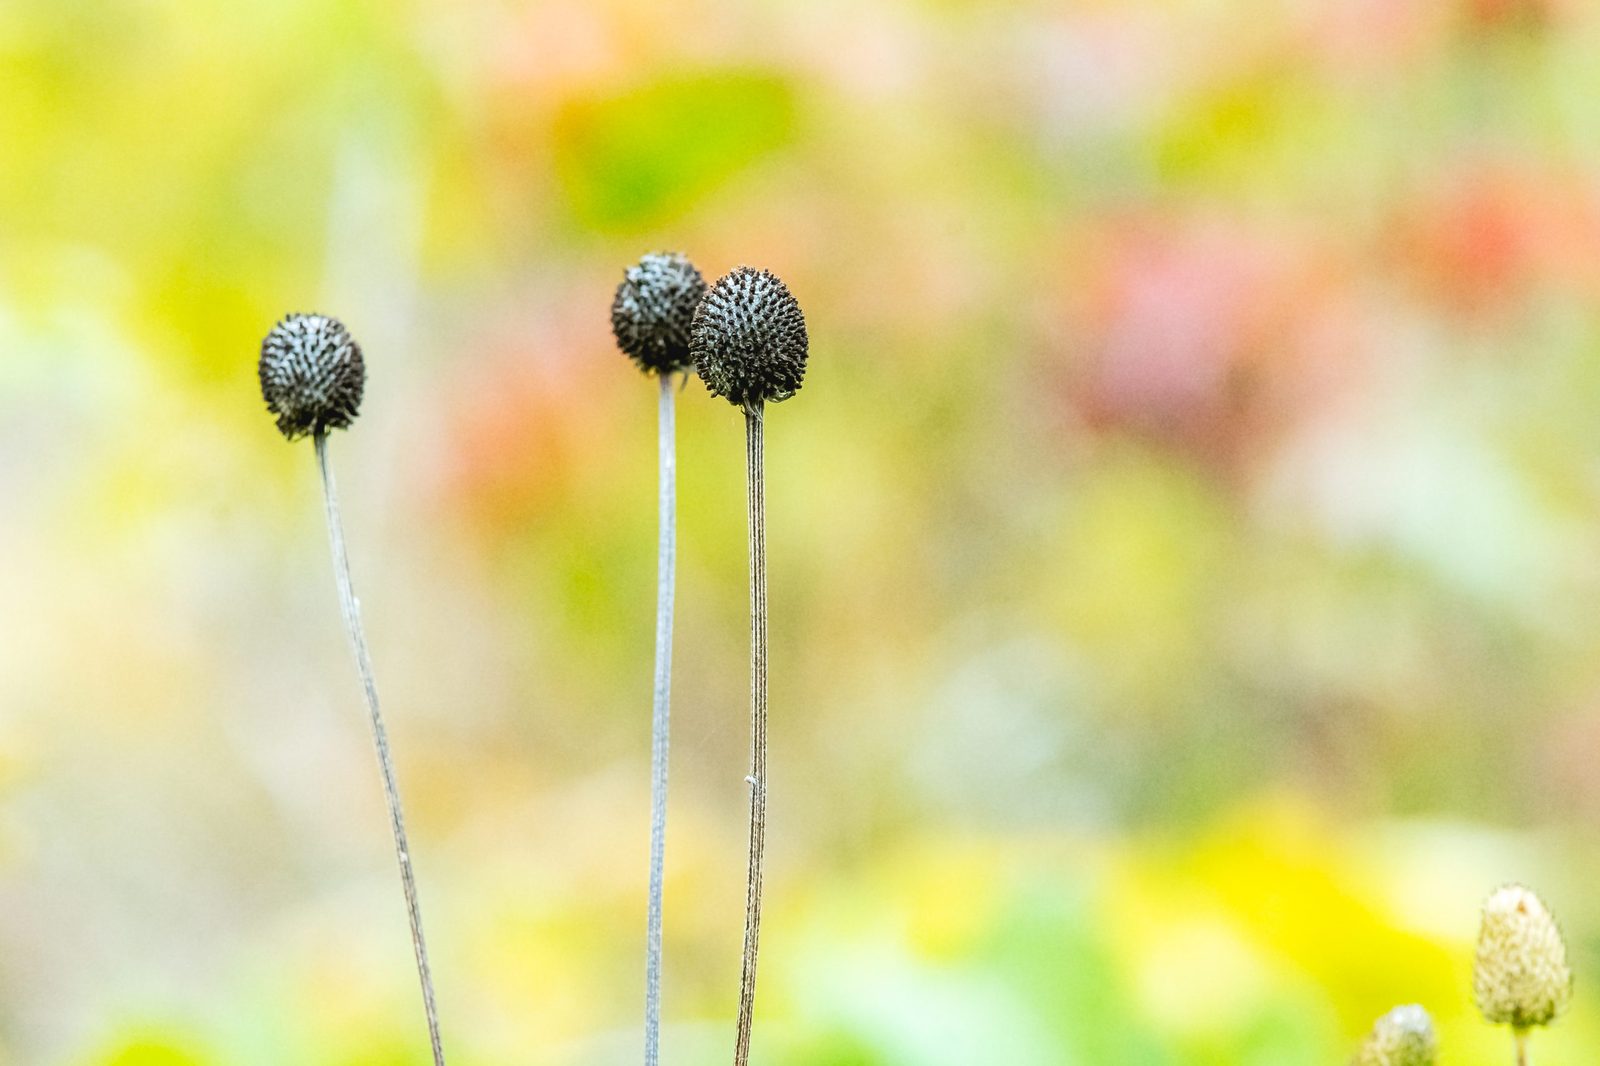 Close-up of black spherical plant with a long stalk.